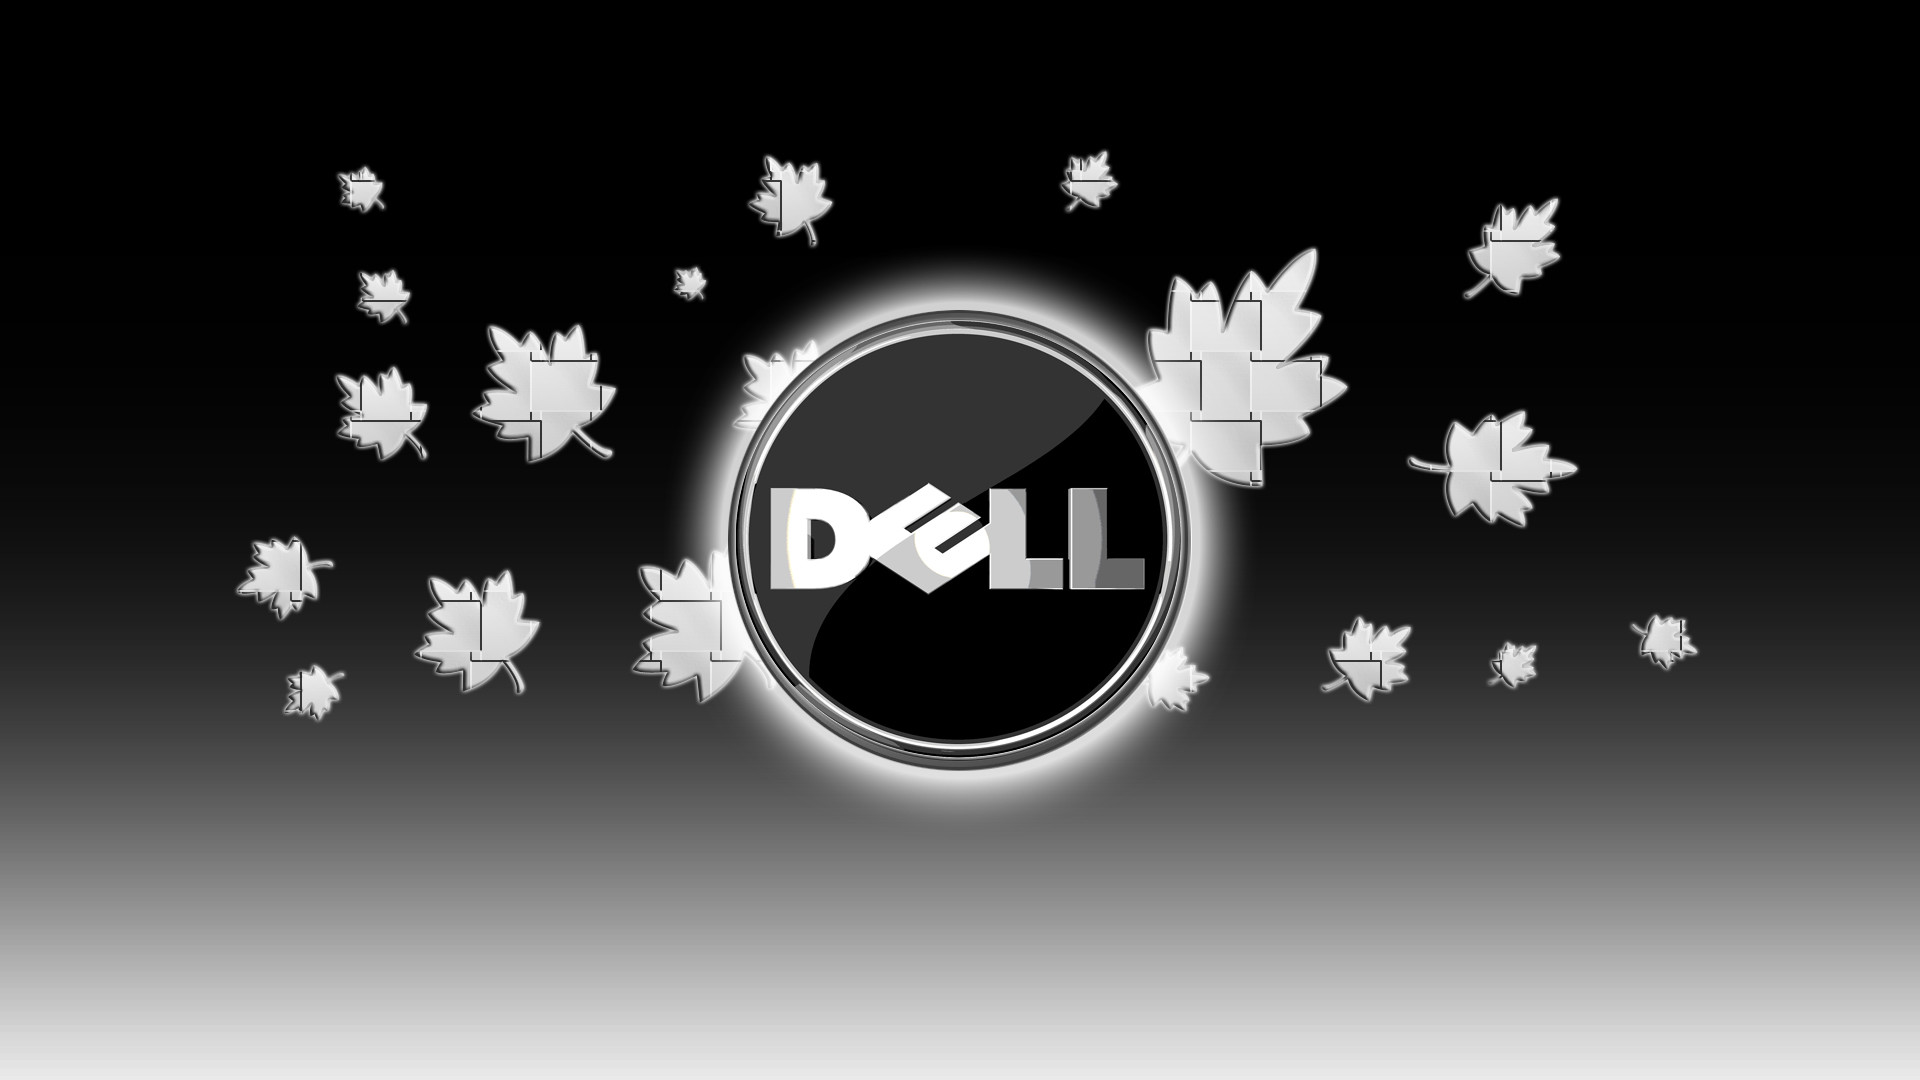 Dell Wallpapers 64 Pictures